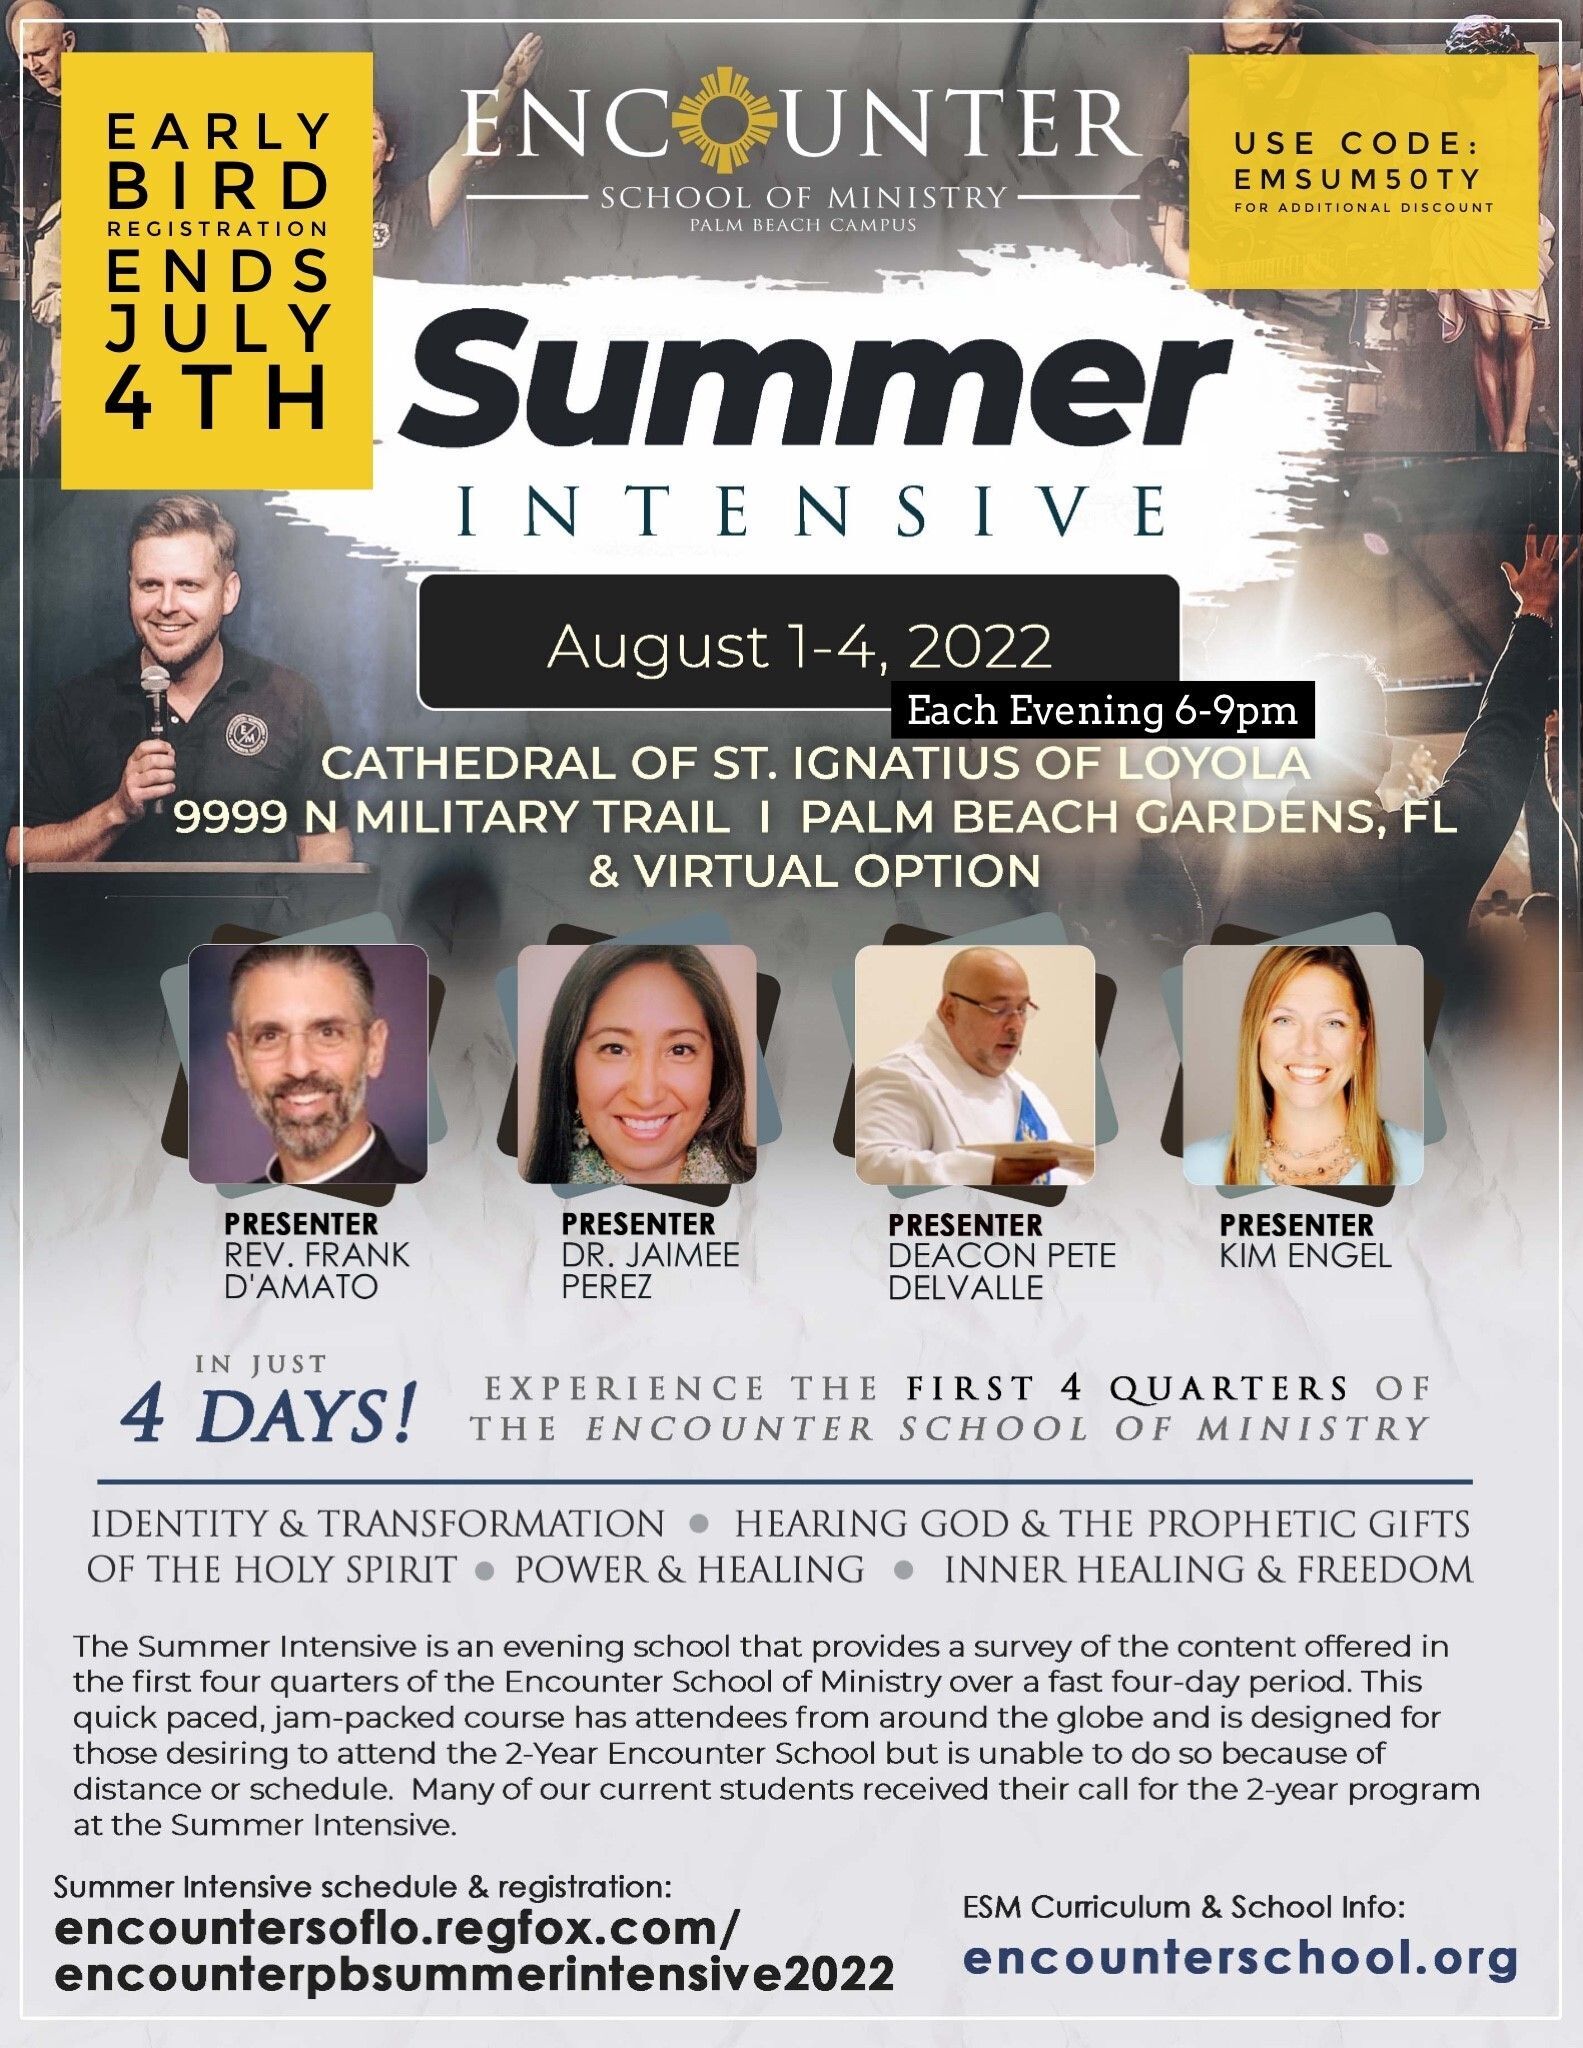 Encounter Summer Intensive, Aug. 1-4  - Early Bird Registration ends July 4